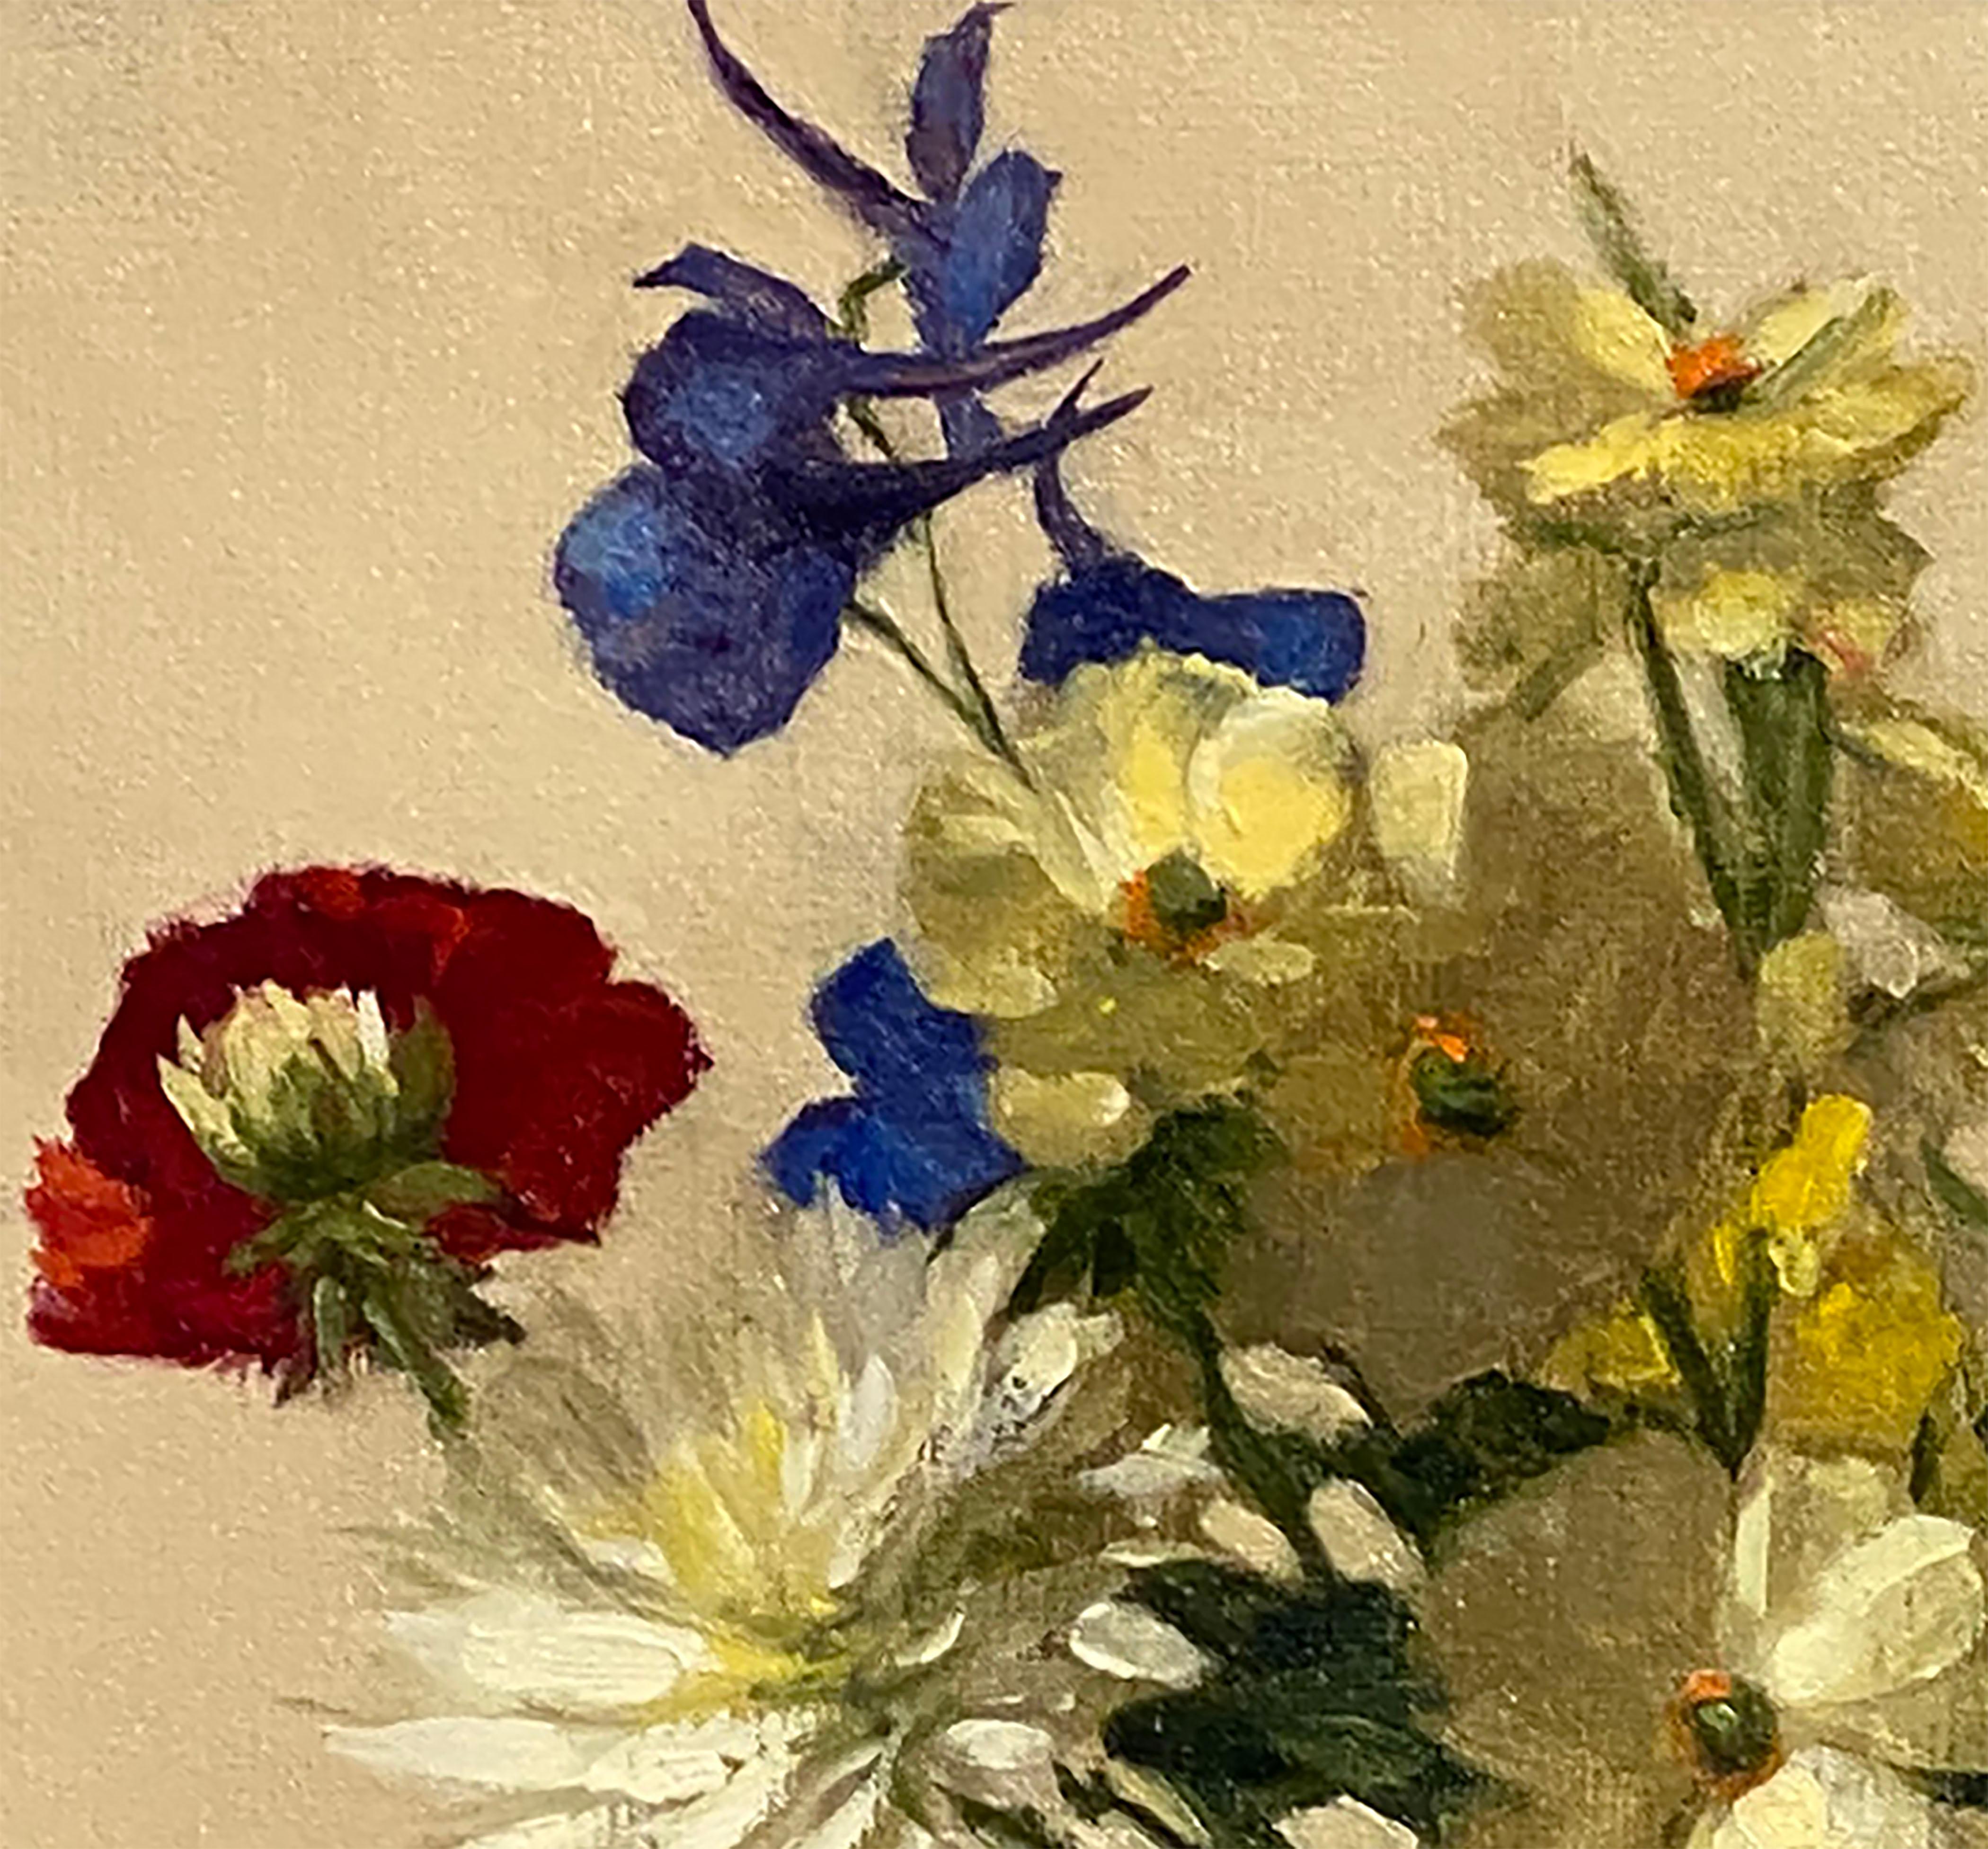 Texas Spring Bouquet (Realist still-life of red, white & blue vase of flowers) - Brown Still-Life Painting by Sarah Lamb